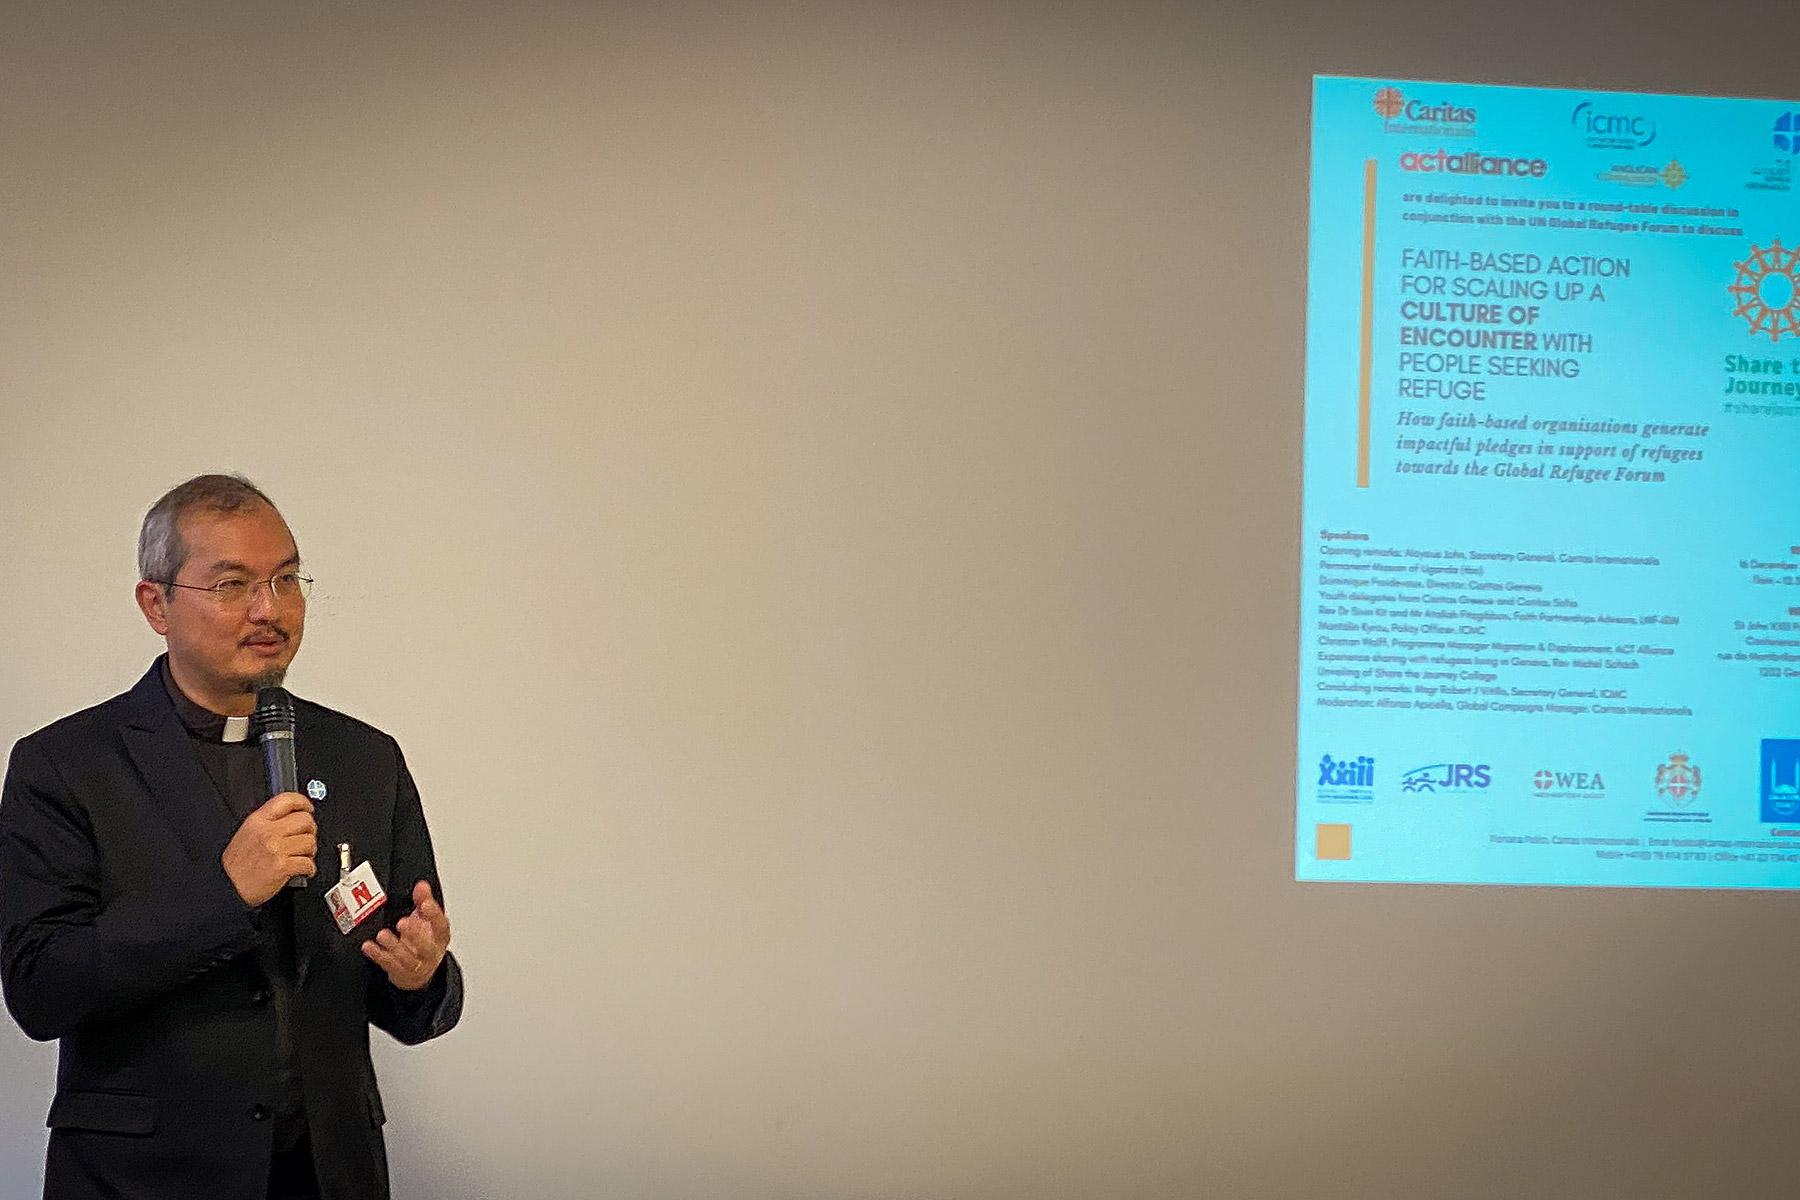  Rev. Dr Sivin Kit, LWF Program Executive for Public Theology and Interreligious Relations speaking at a Global Refugee Forum side event on scaling up a culture of encounter with people seeking refuge, held in Geneva. Photo:: LWF/A. Danielsson